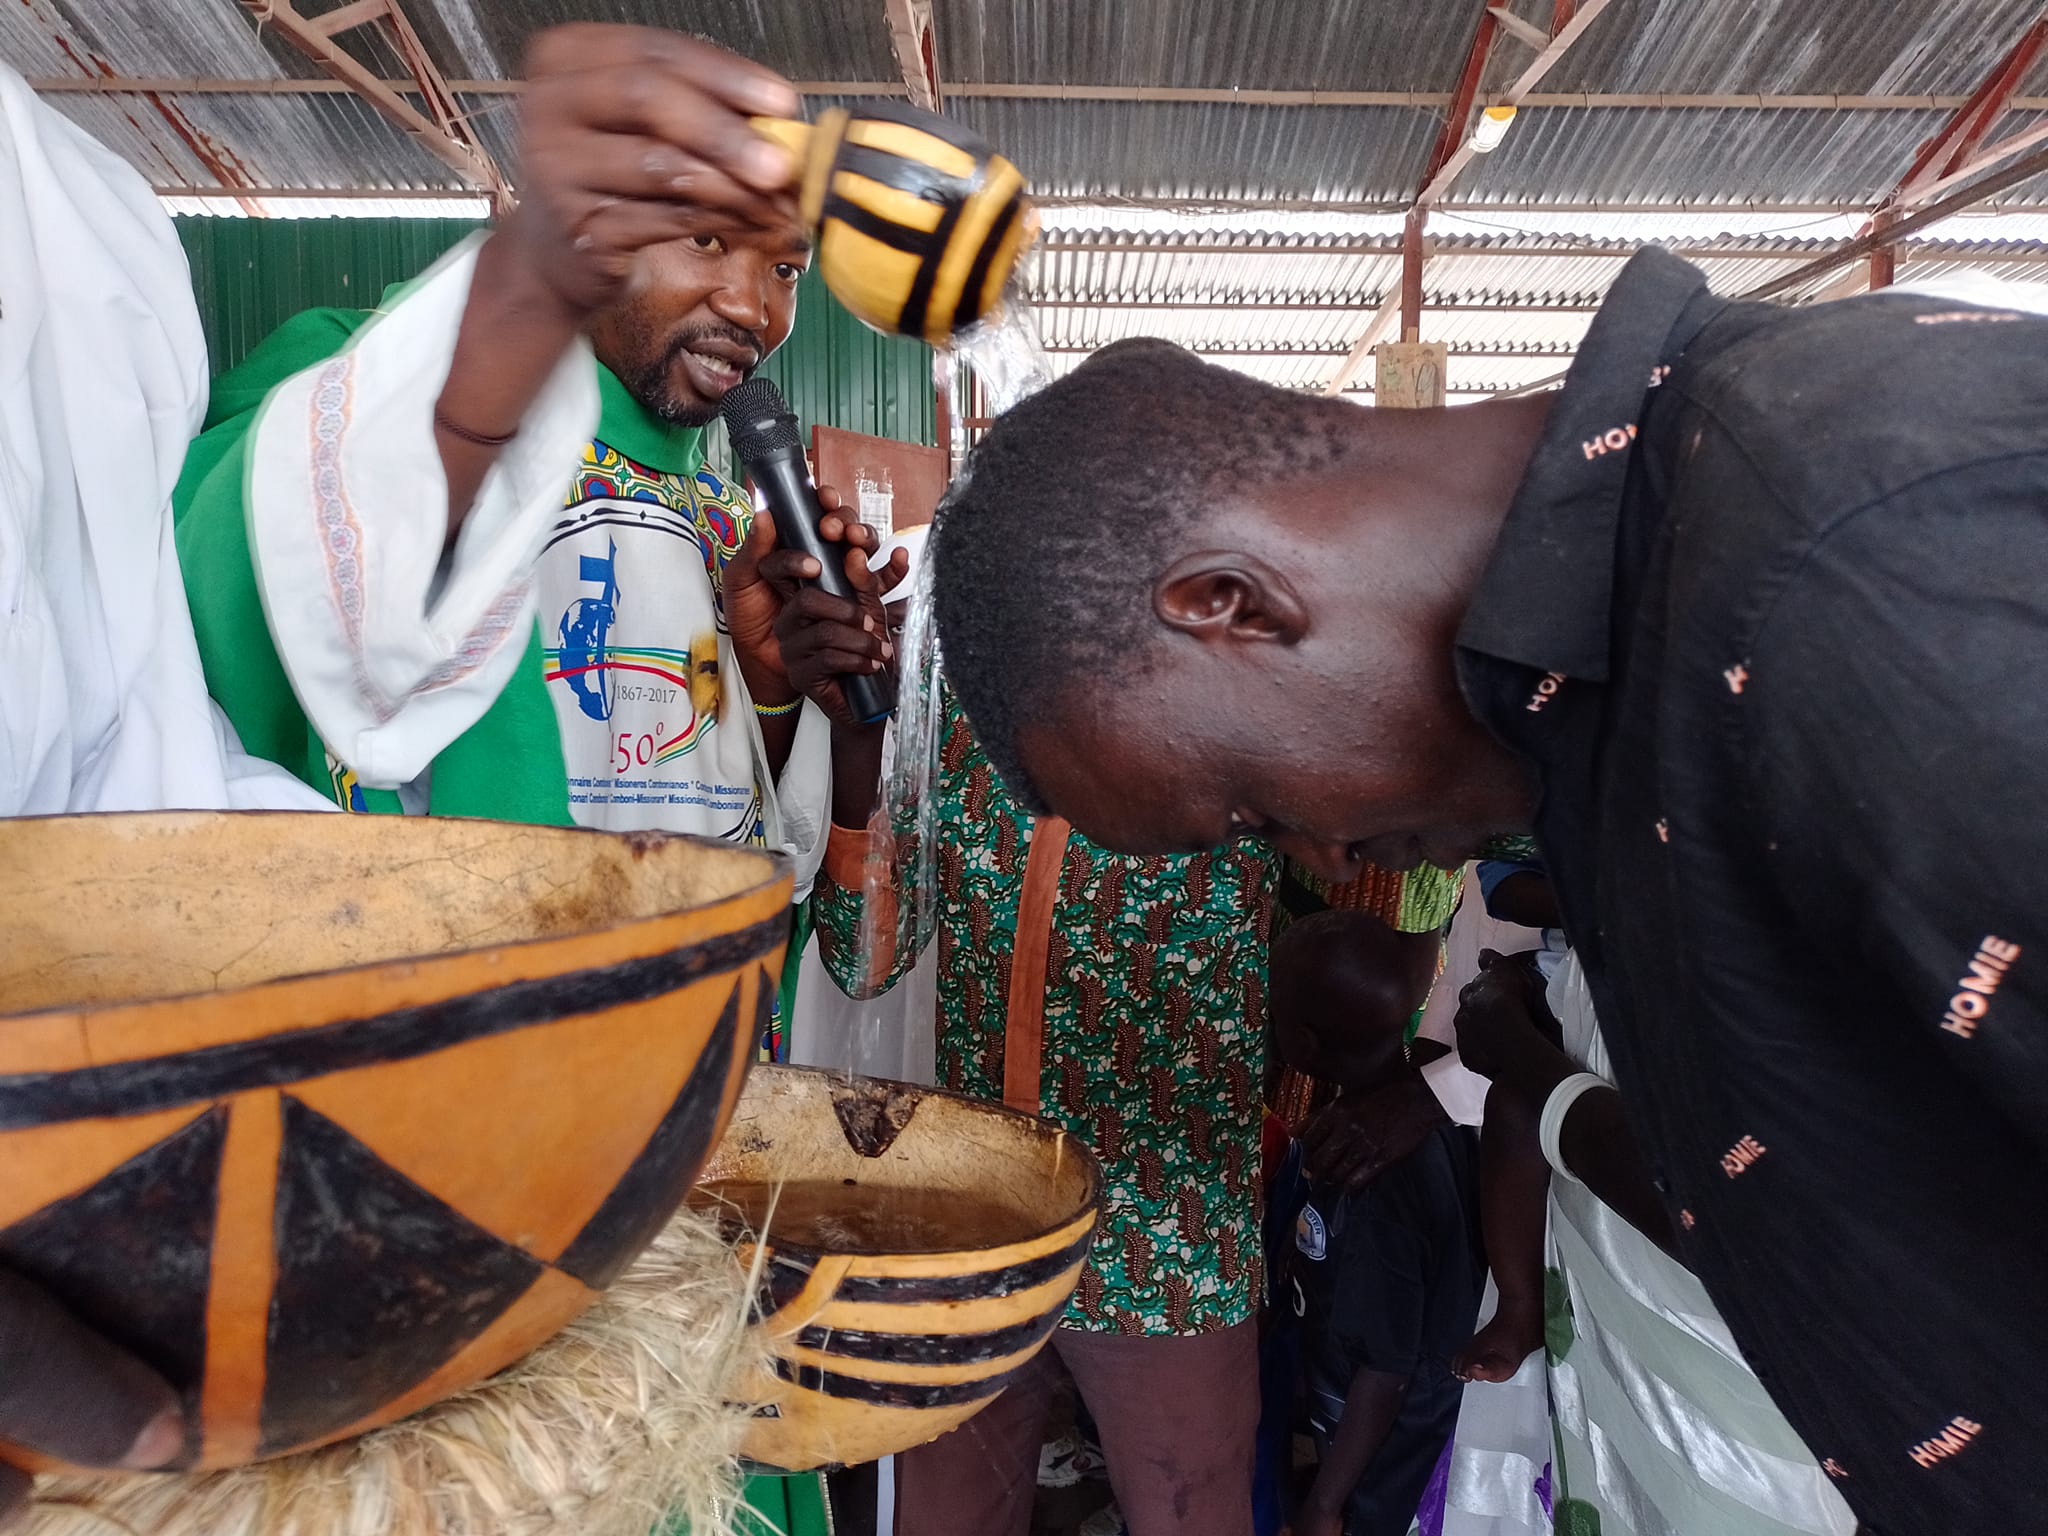 Fr Alfred pours water over a mans head for baptism. The baptismal cup is made from a gourd. the bowl beneath the young man is wooden with traditional African carvings